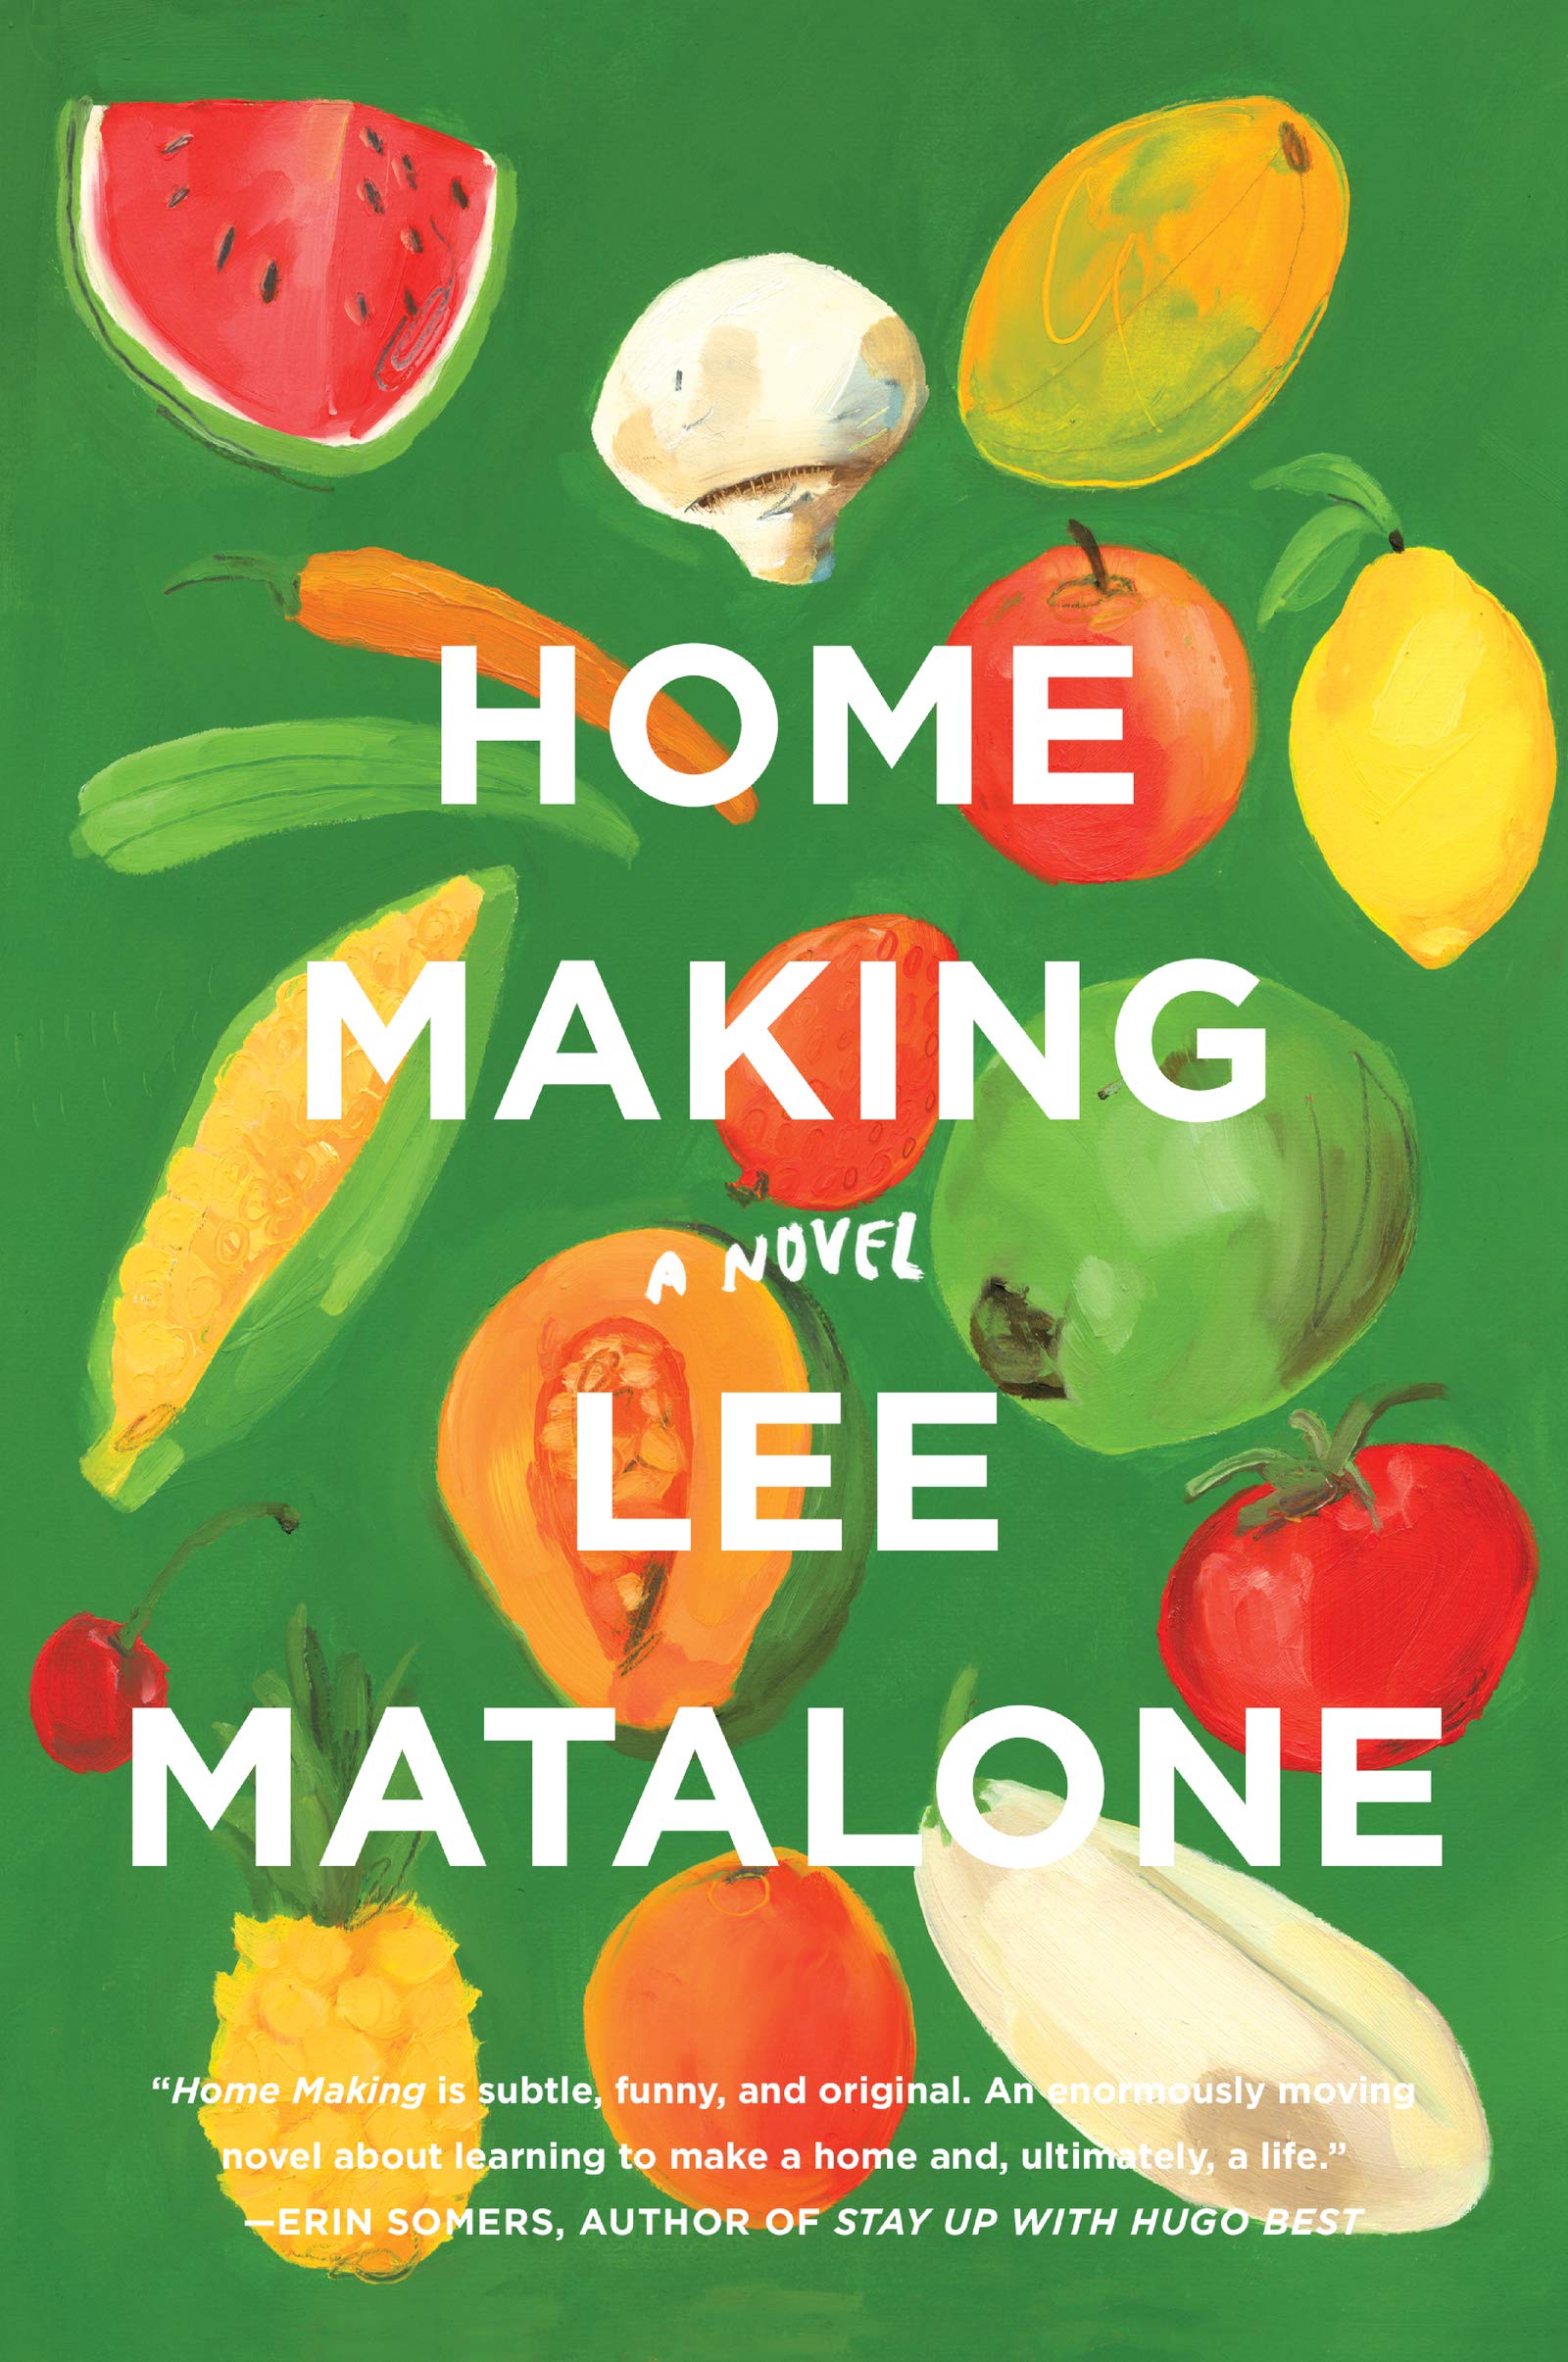 Book Launch: Home Making by Lee Matalone in conversation with Erin Somers